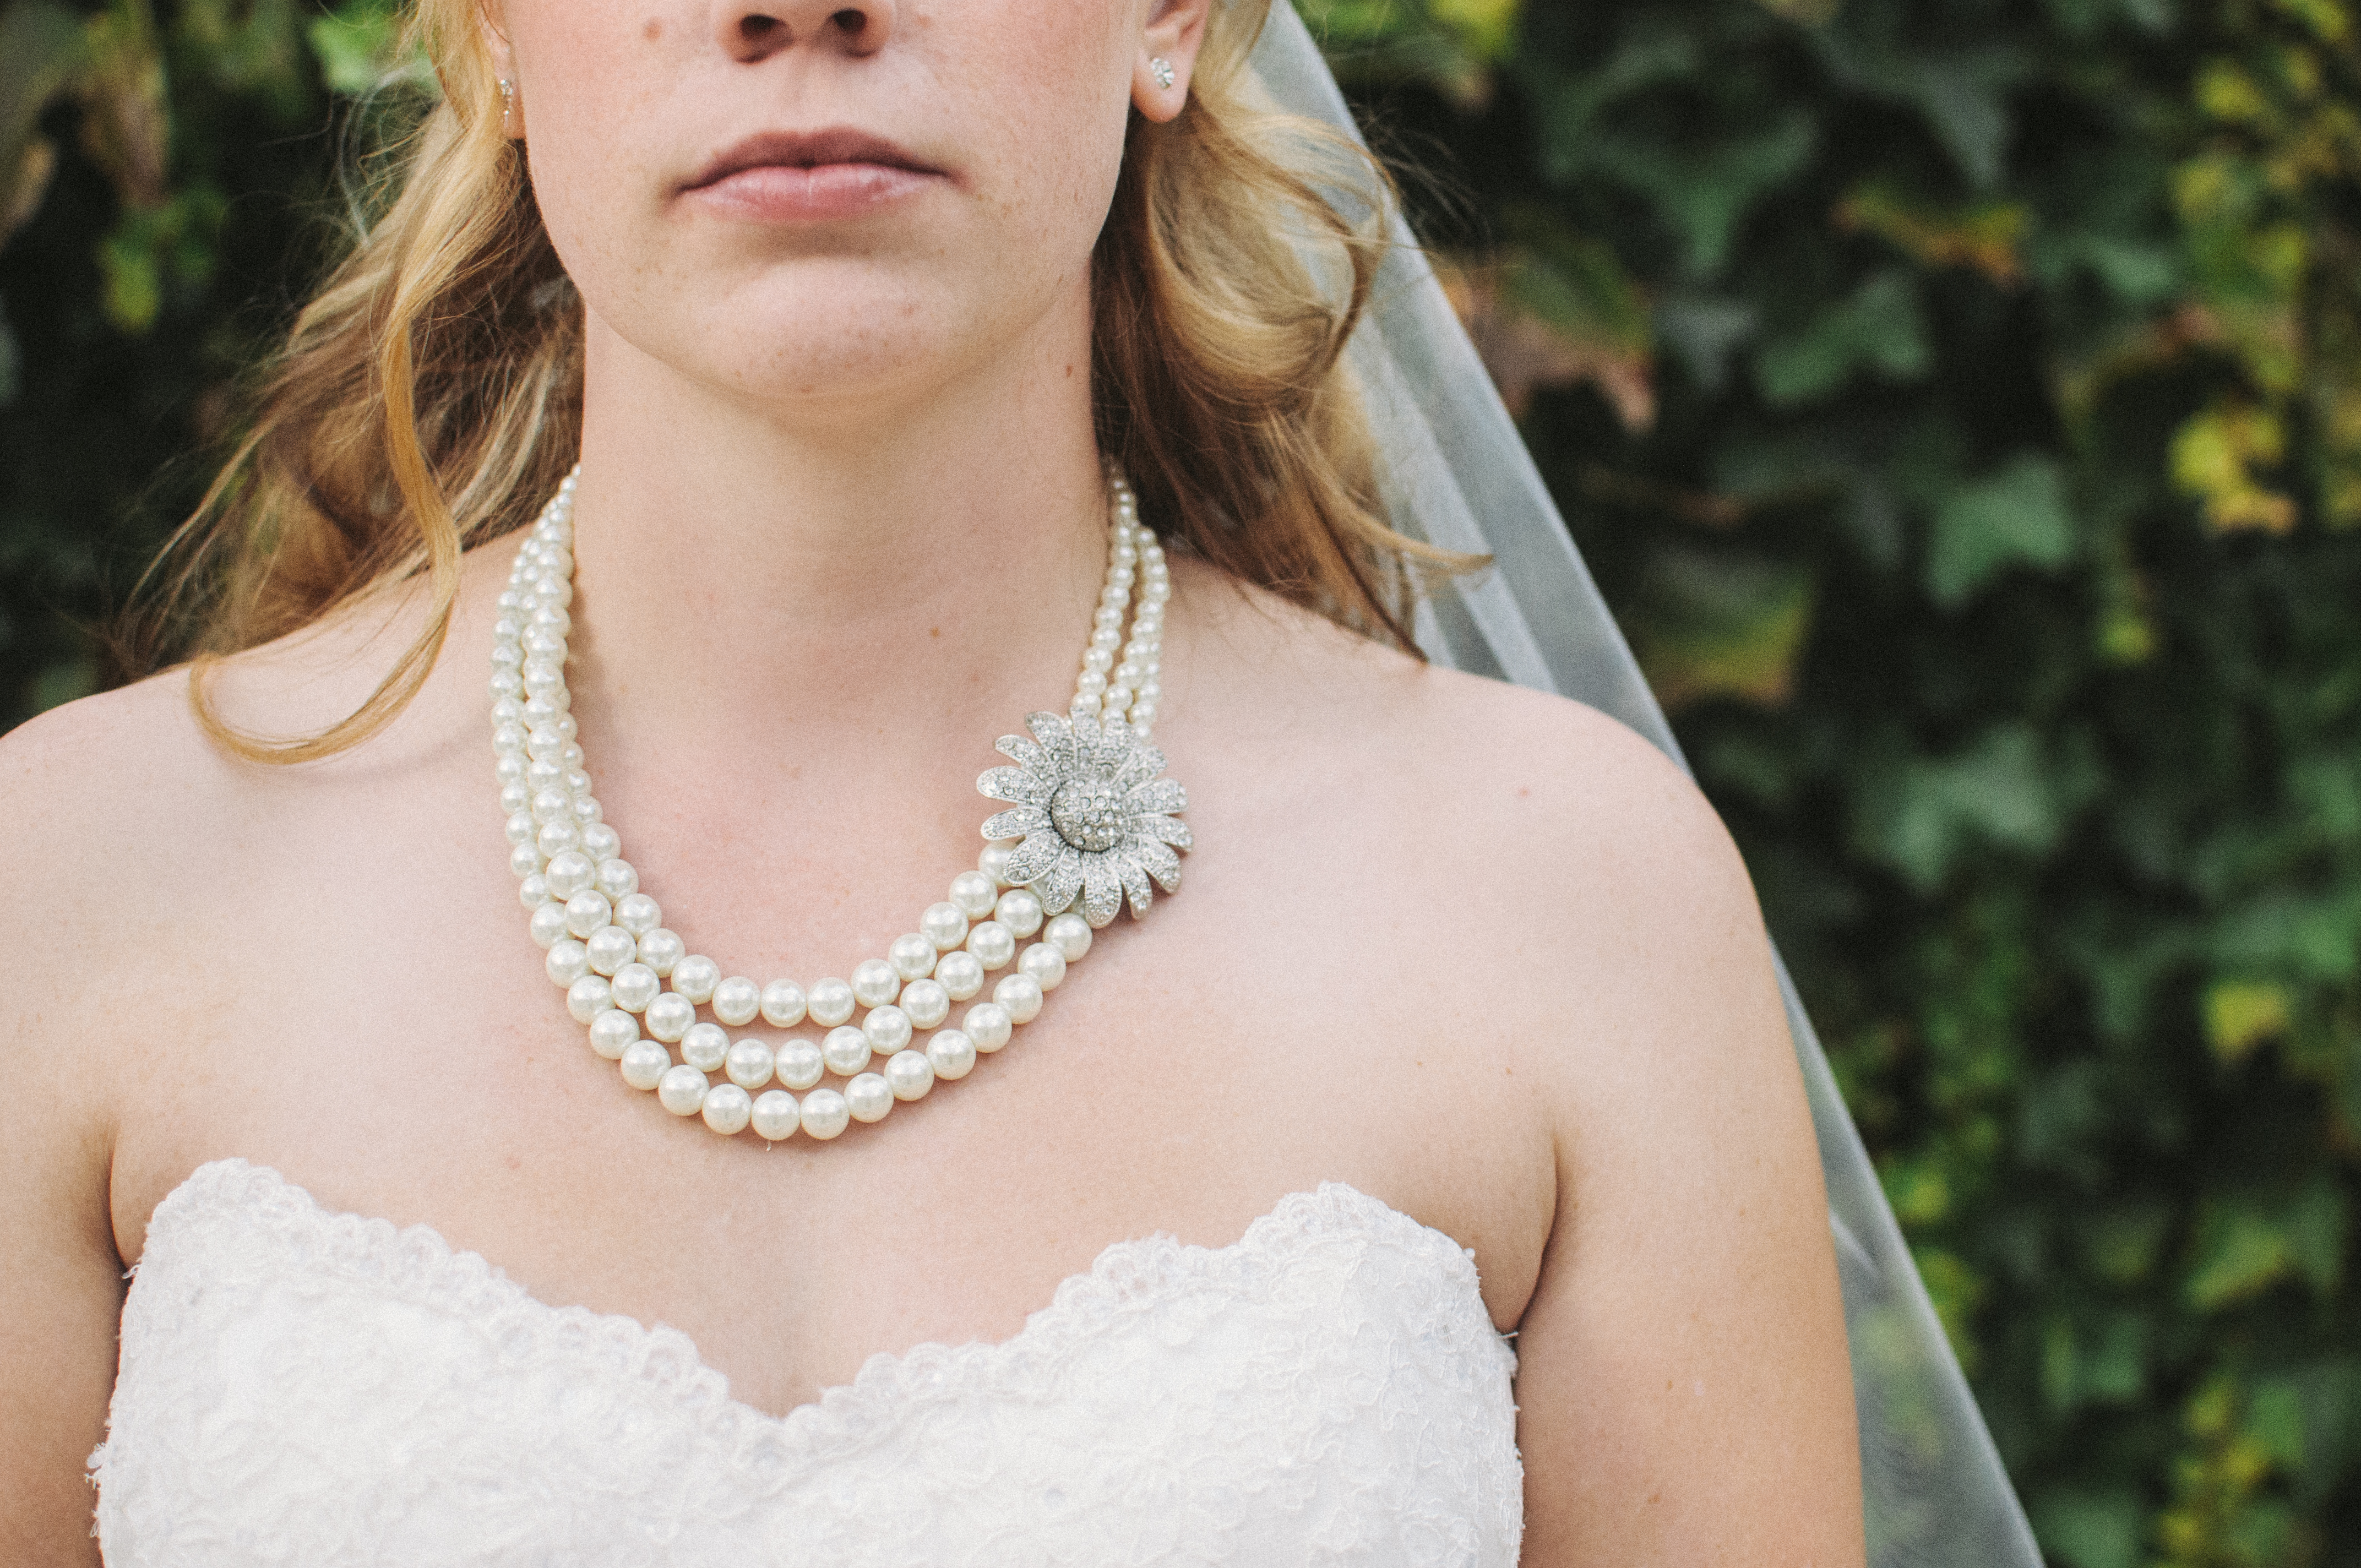 So You’ve Finally Found Your Wedding Dress: Choosing the Perfect Jewelry to Match